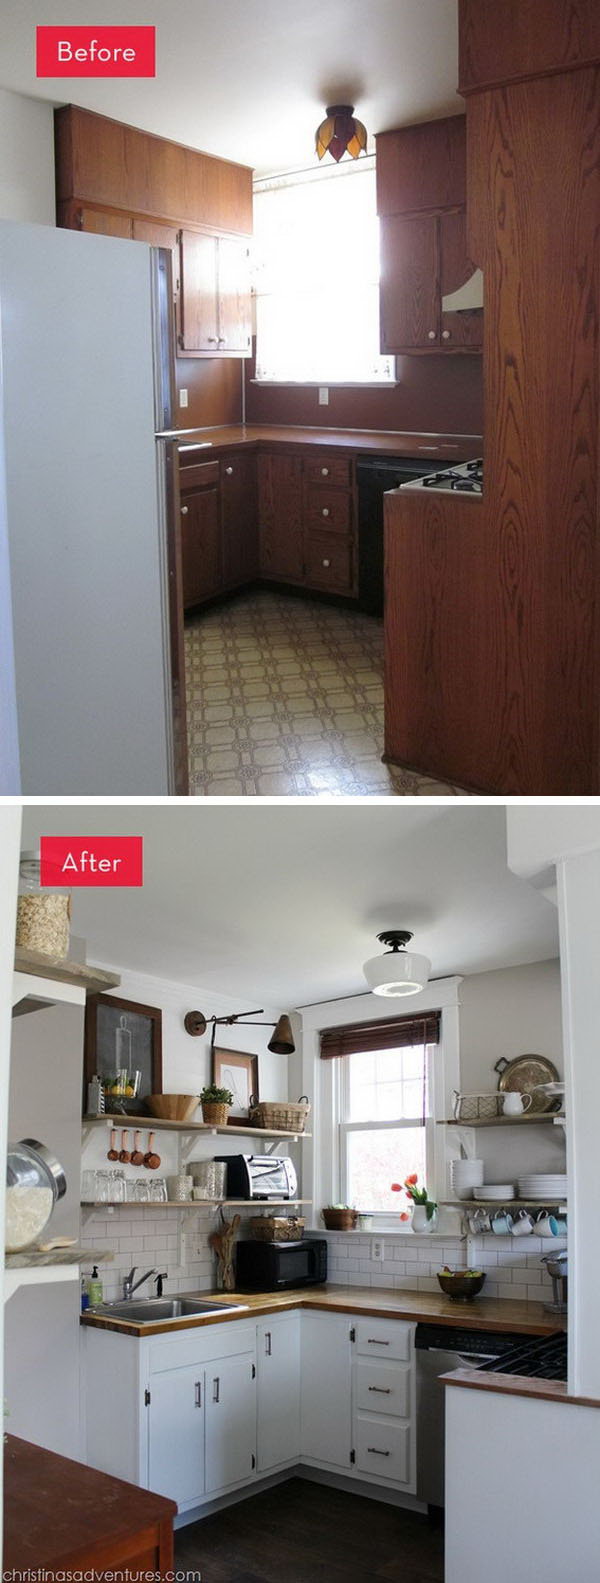 Before and after: A dark kitchen gets a refreshing new look. What an amazing improvement. This kitchen was dark and grubby with the brown cabinets and the backsplash. But now it is flooded with light, airy and inviting. 